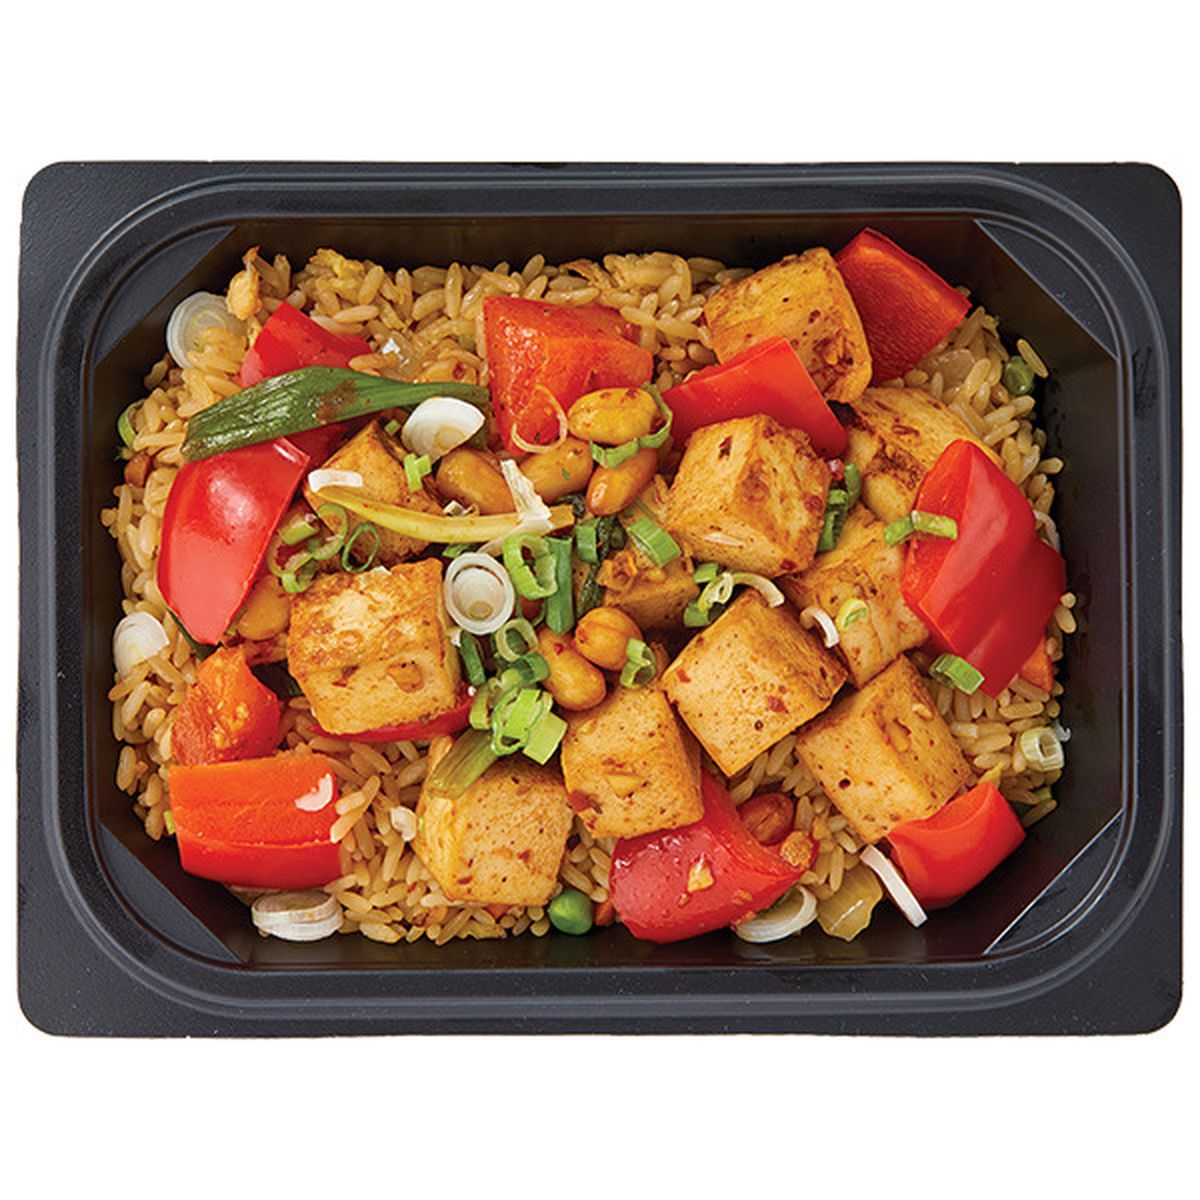 Calories in Wegmans Kung Pao Tofu with Vegetable Fried Rice